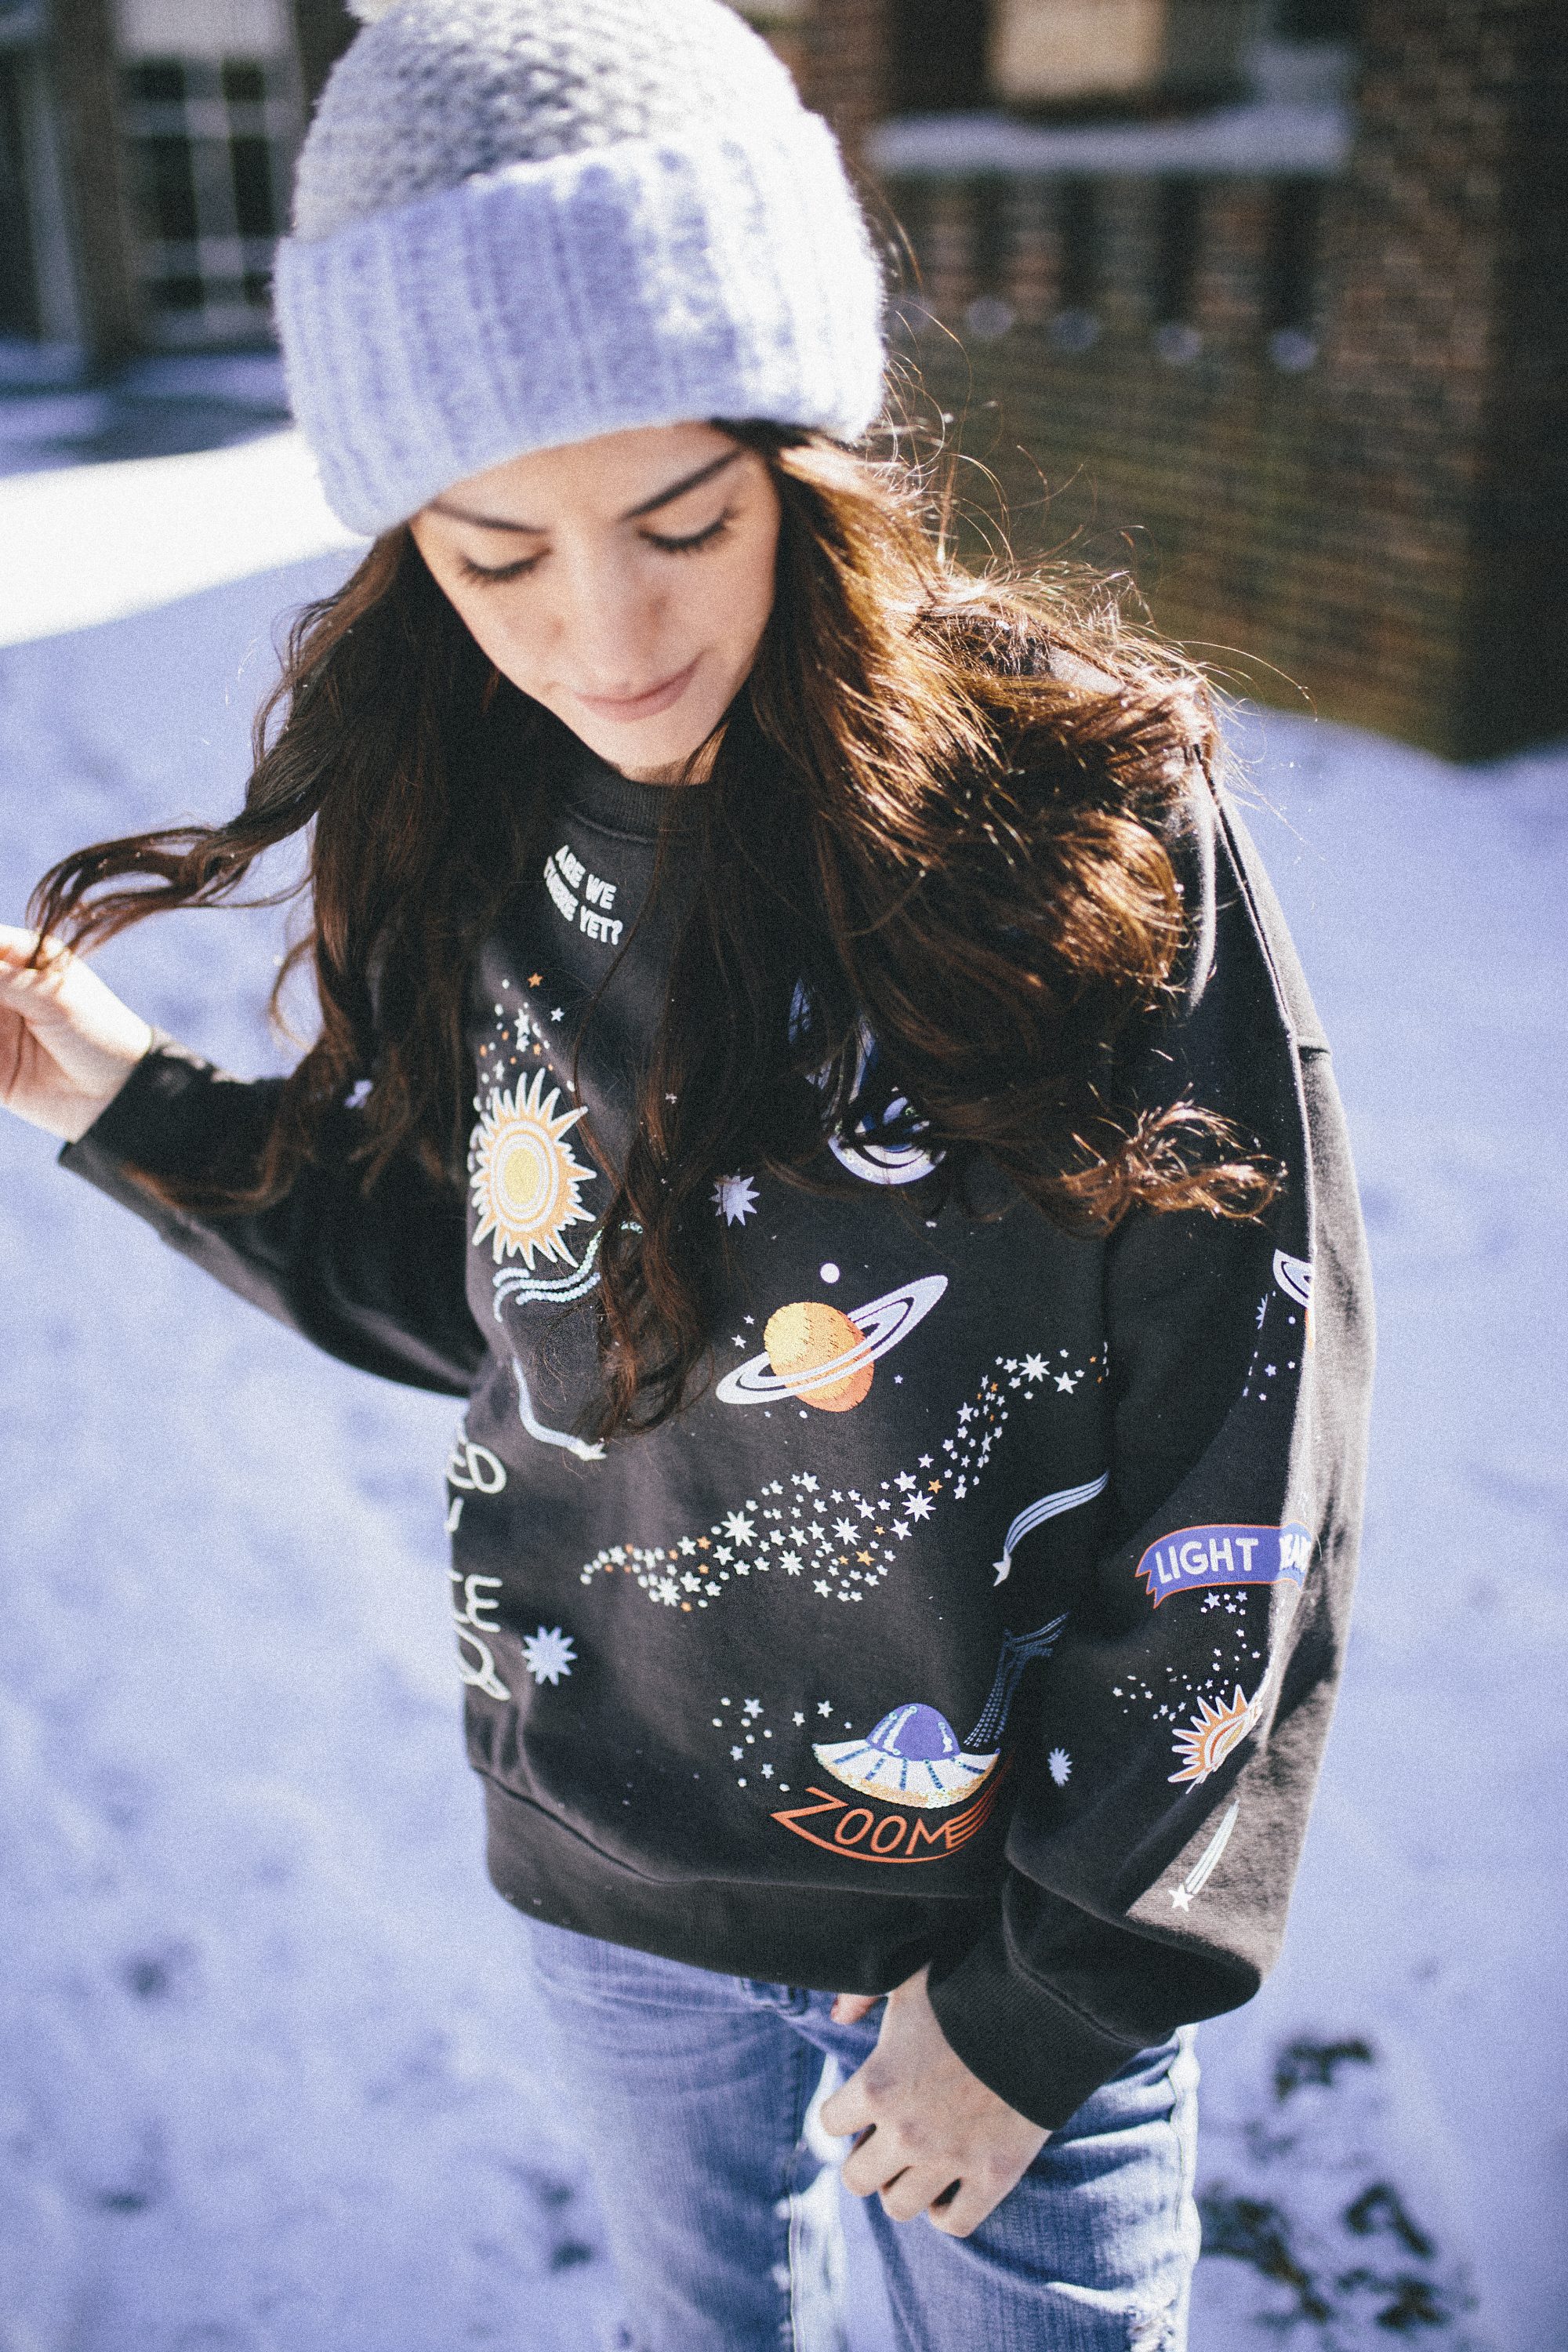 snow day, i need my space sweatshirt, grungy style, casual winter style, distressed denim, casual outfit ideas